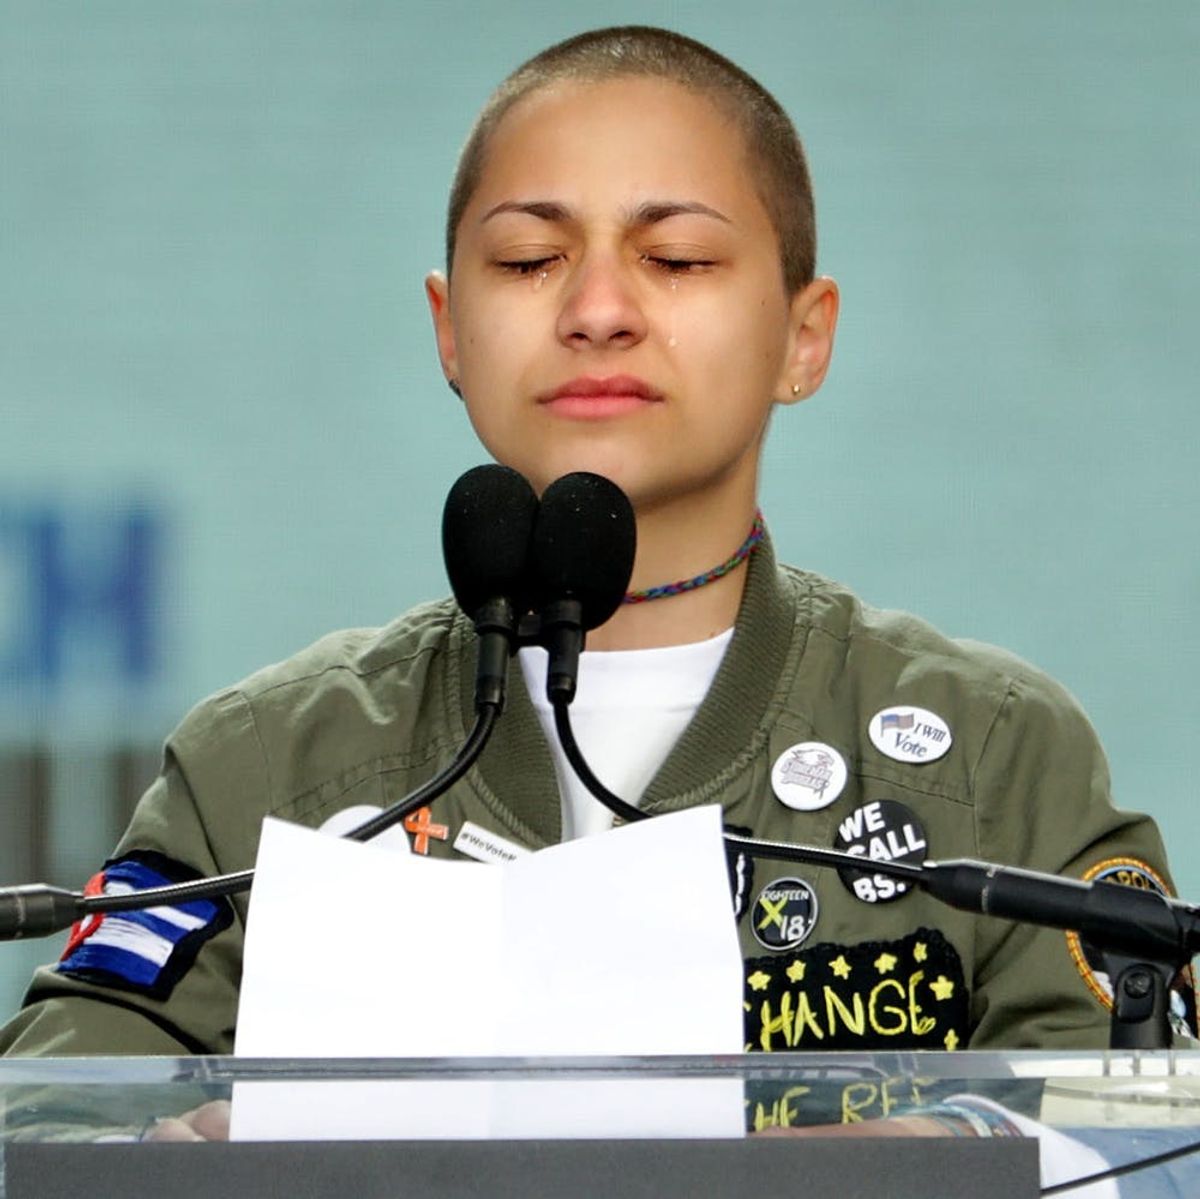 Emma González’s Moment of Silence at March for Our Lives Will Define a Generation